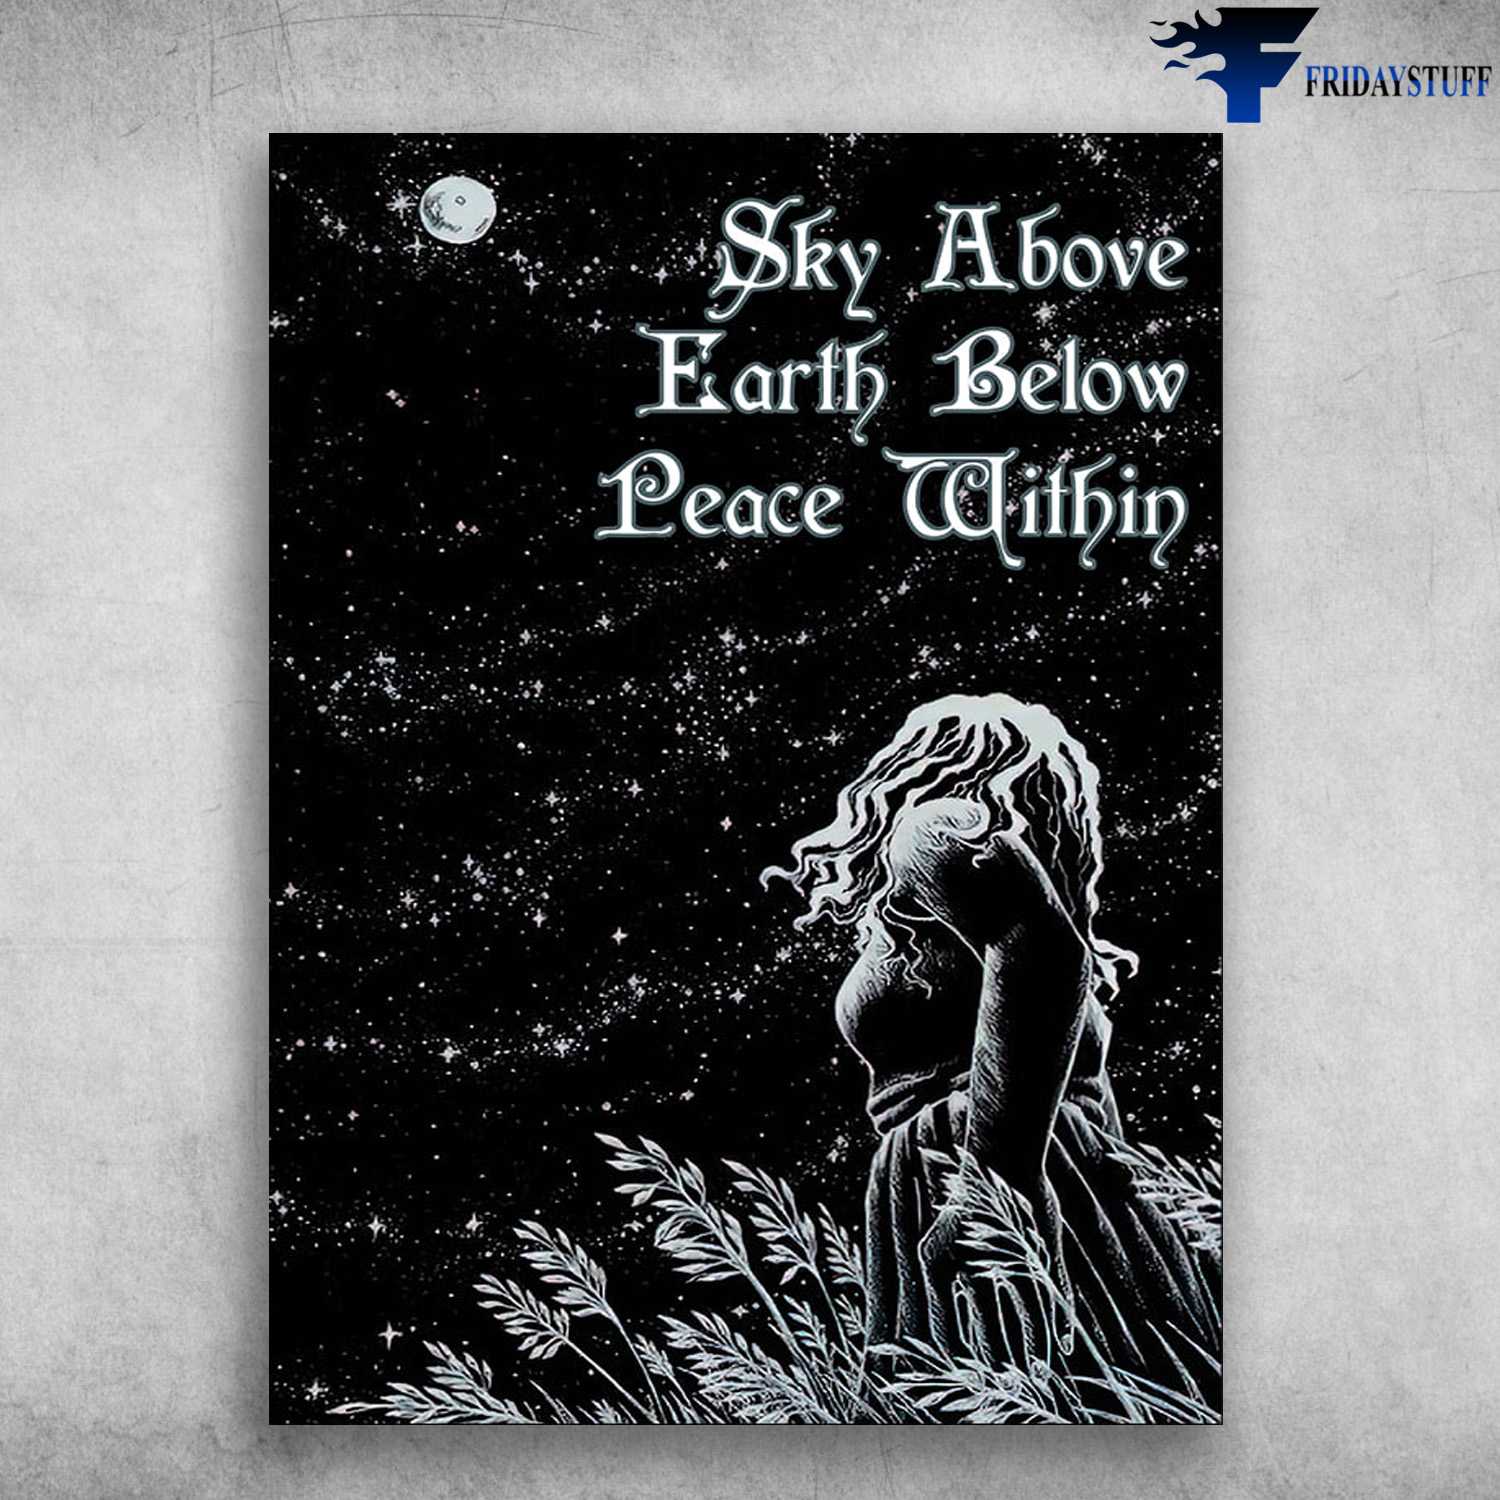 Moon Night, Sky Above, Earth Below, Peace Within